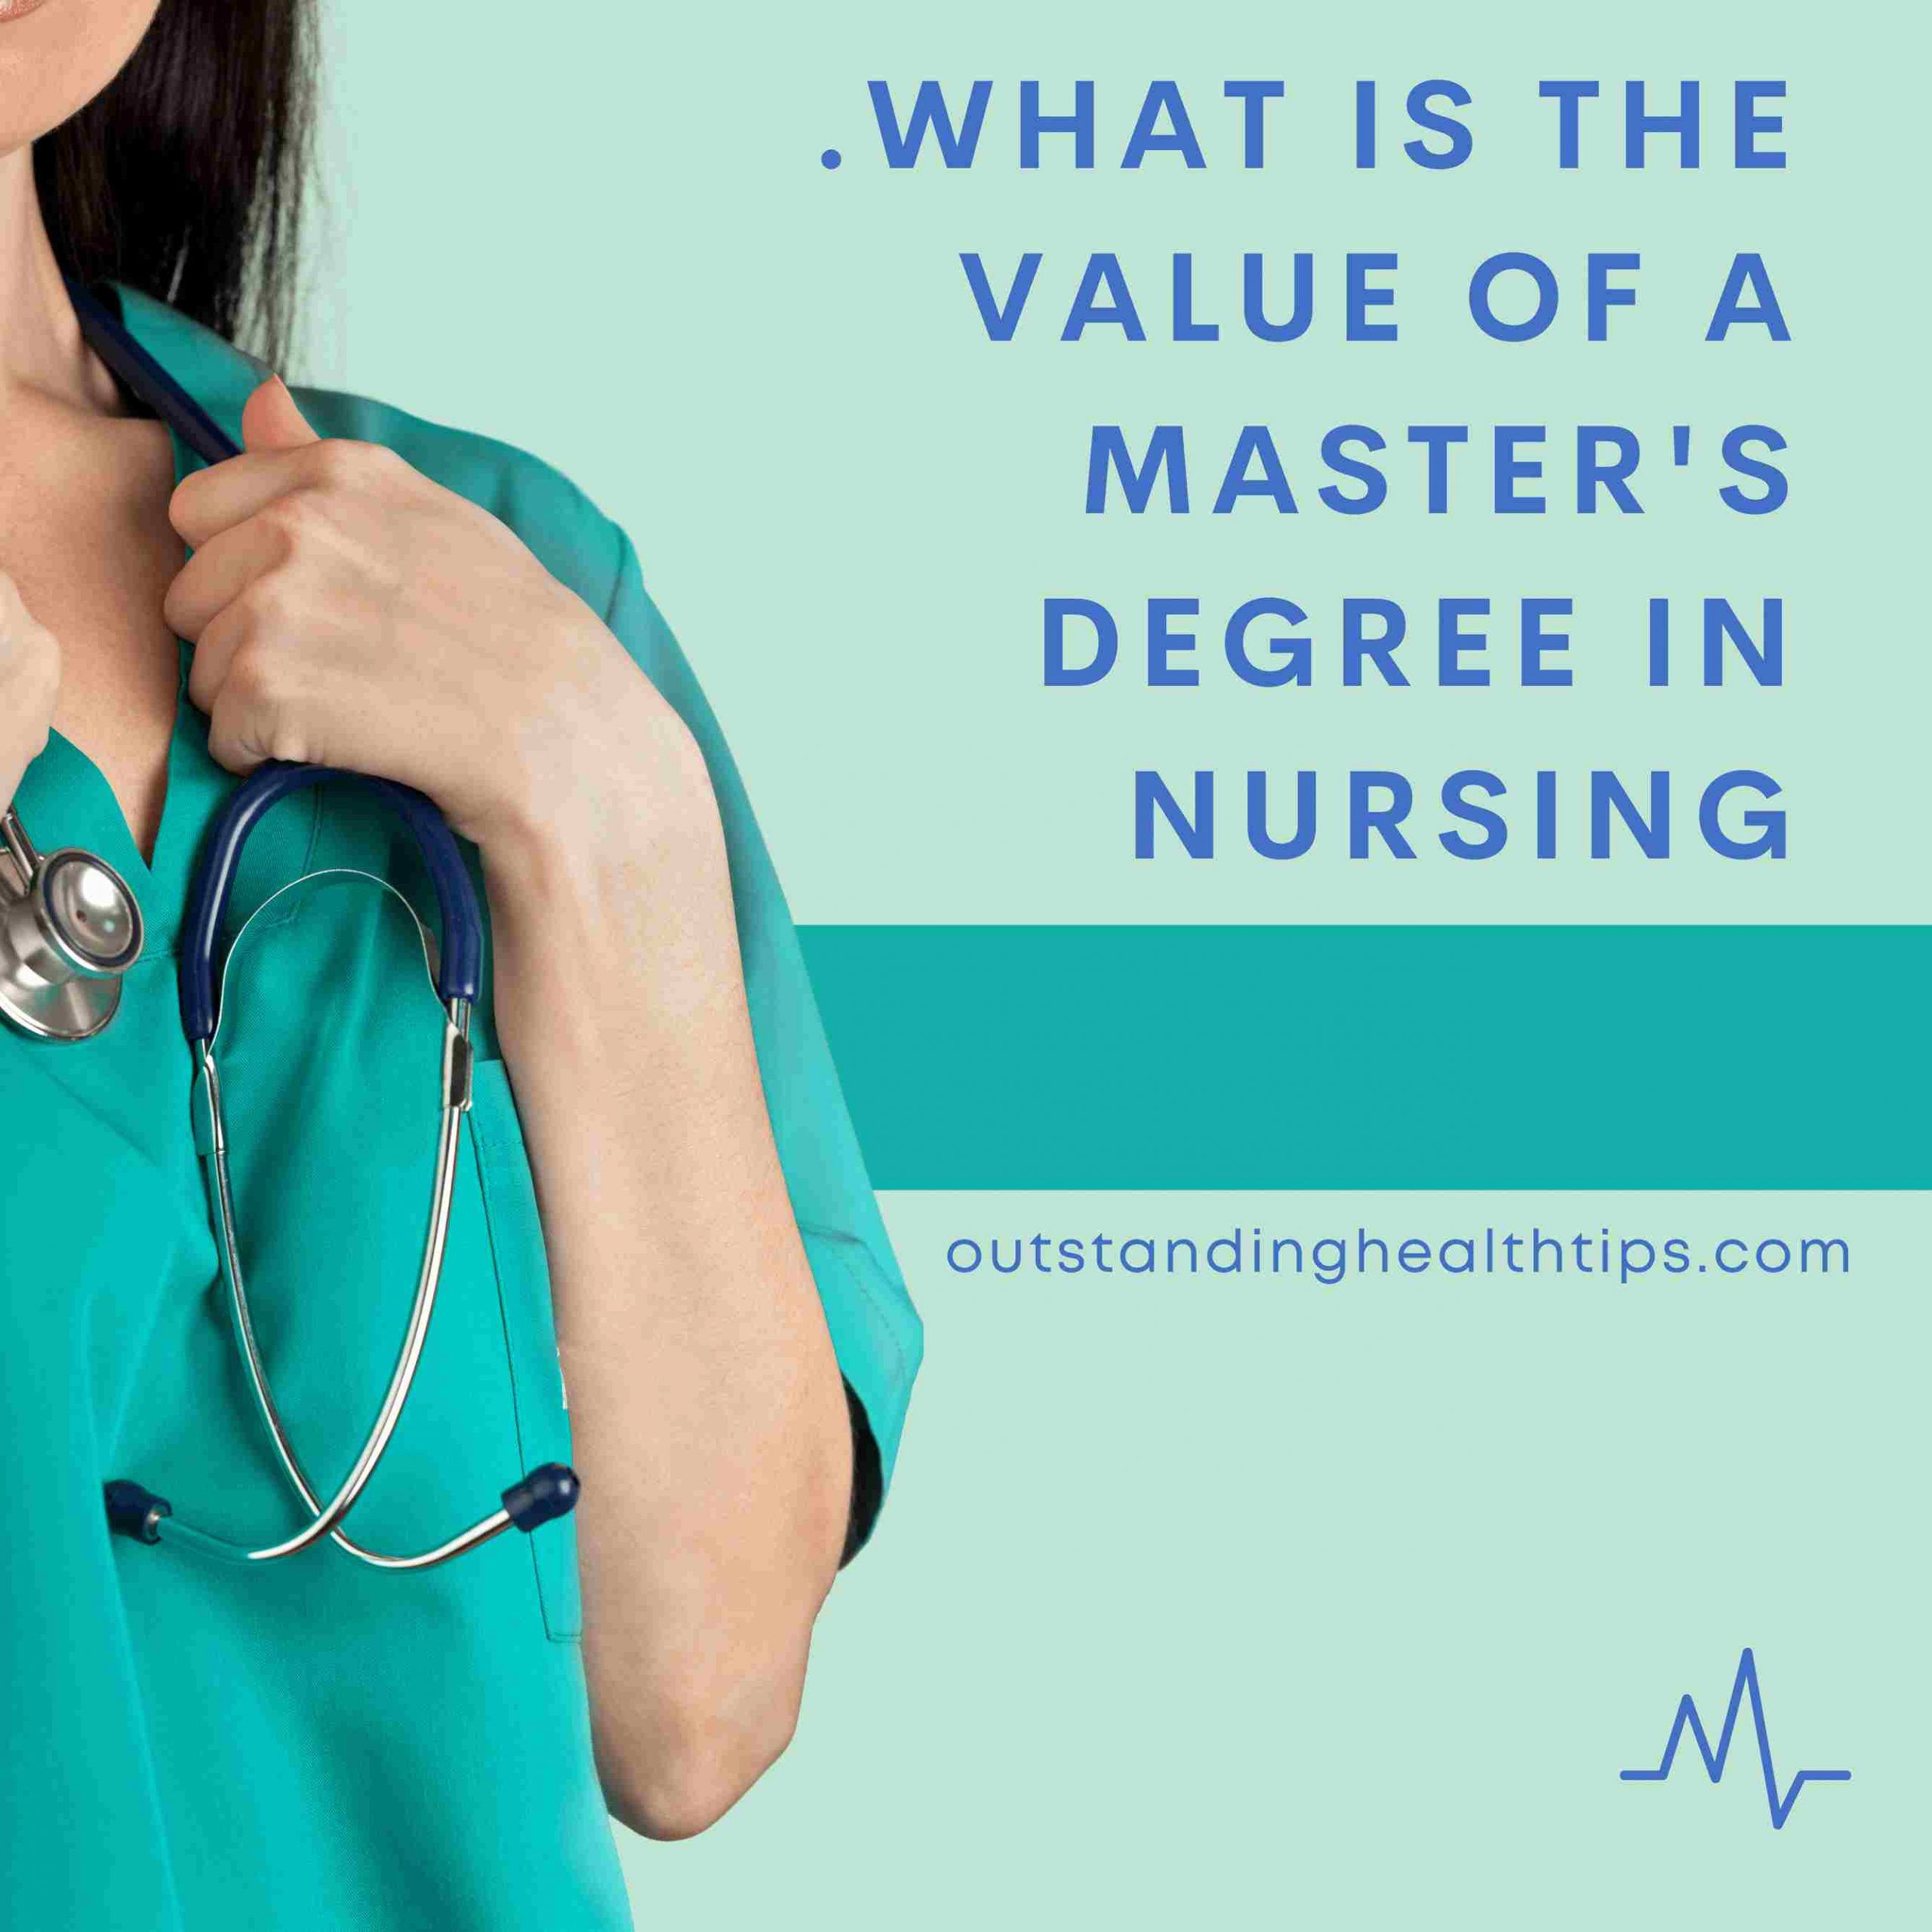 what is the value of a master's degree in nursing